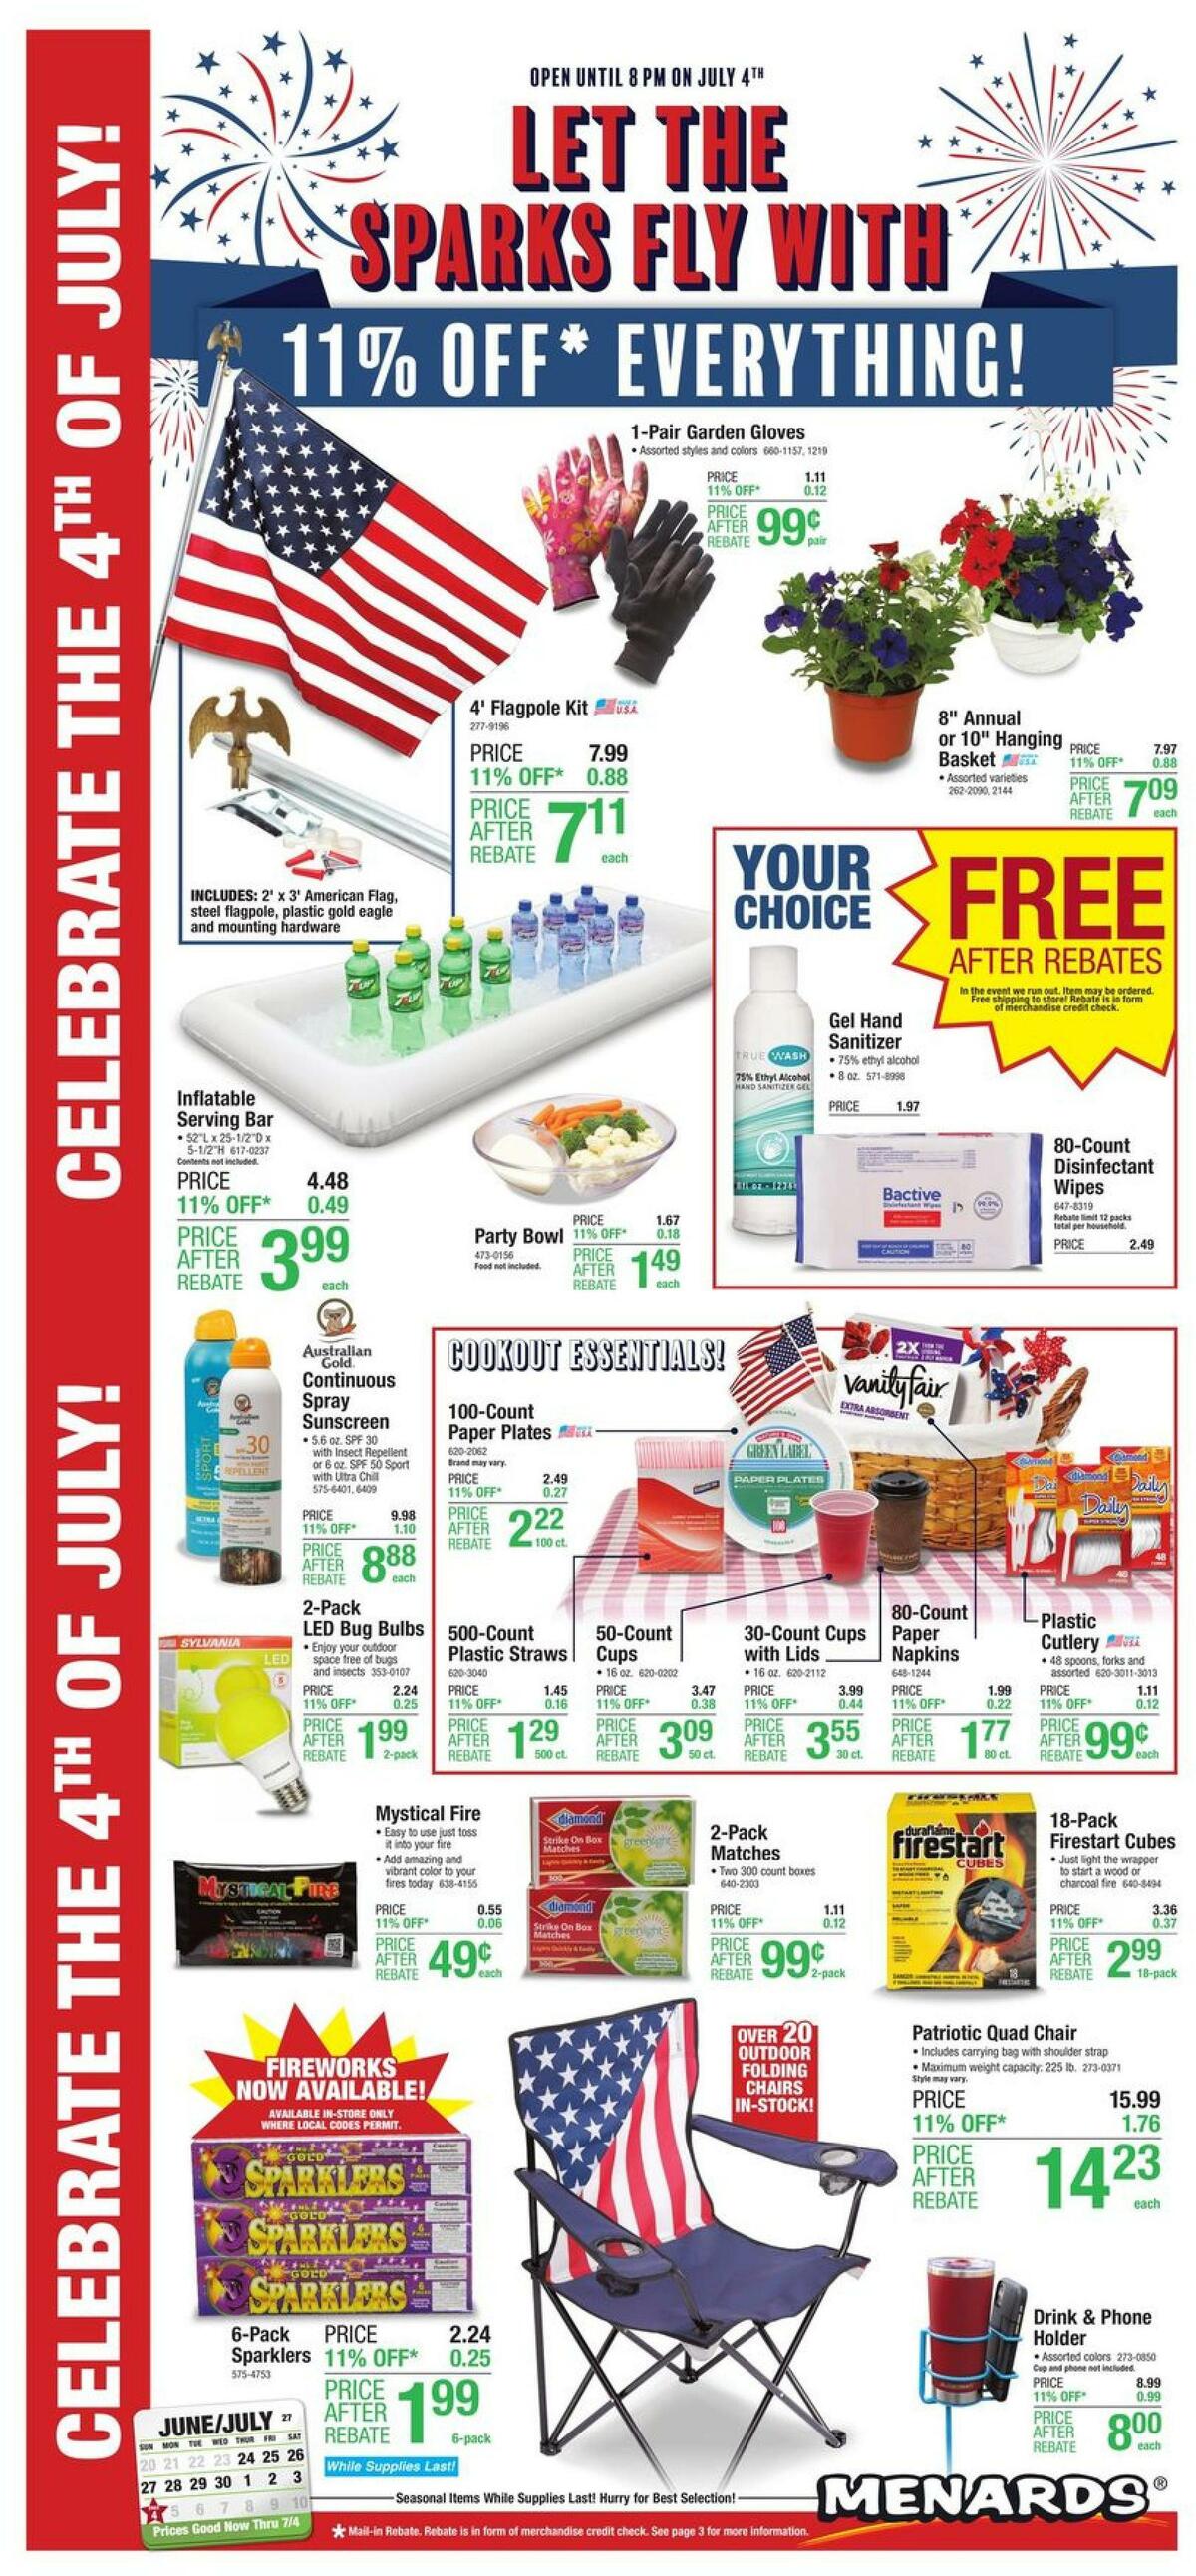 Menards 4TH OF JULY FUN! Weekly Ads & Special Buys from June 24